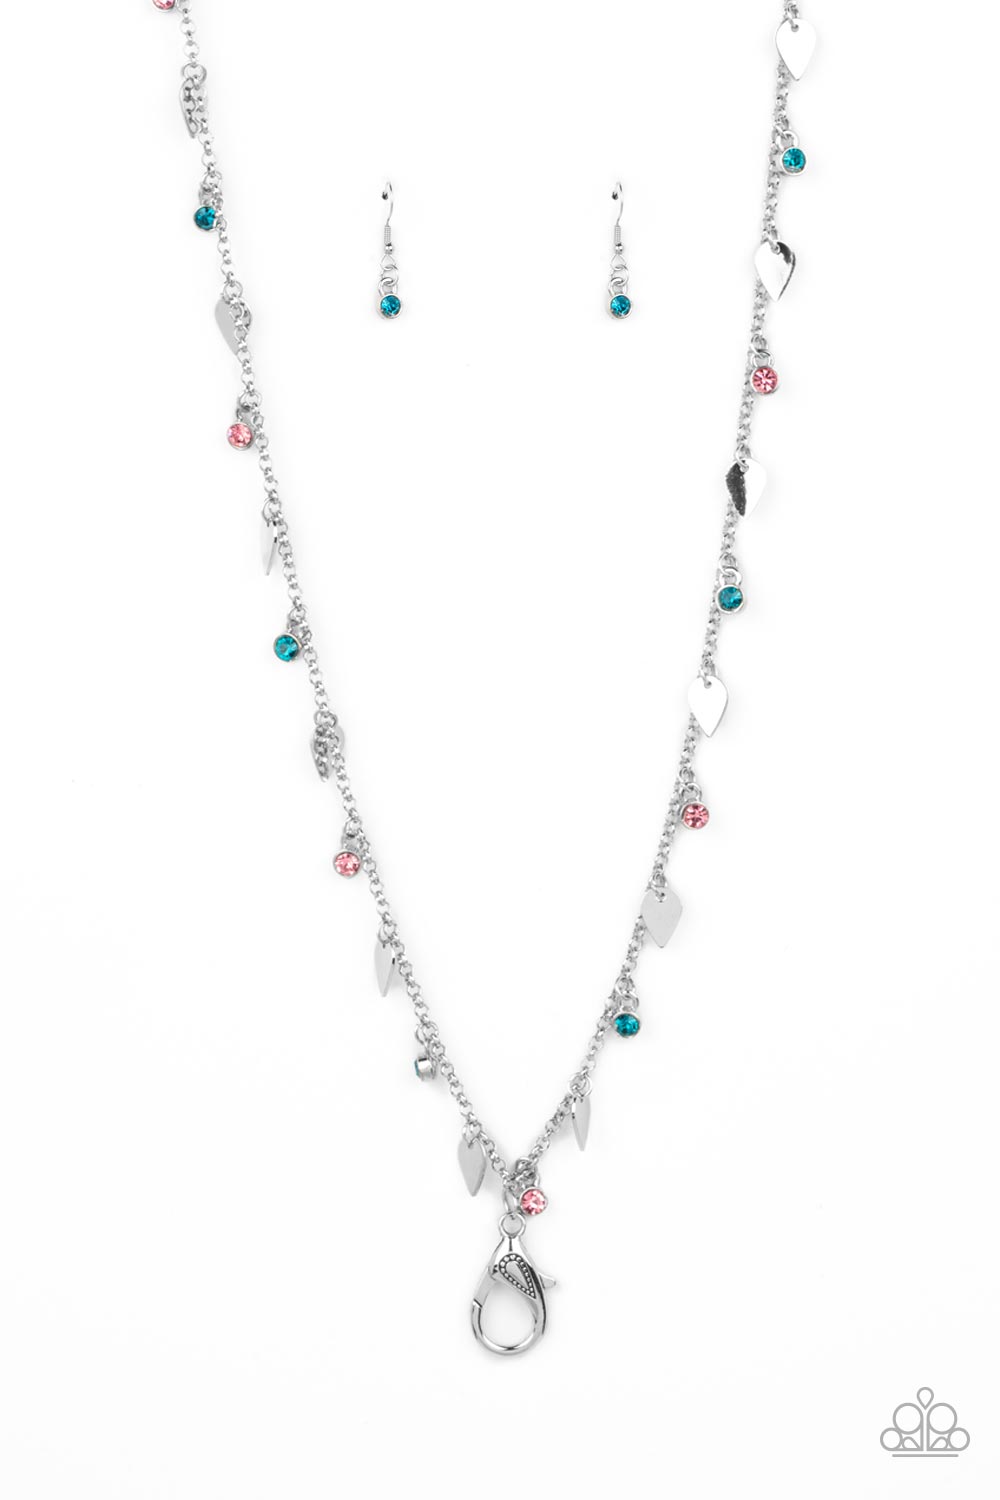 Sharp-Edged Shimmer Paparazzi Accessories Lanyard with Earrings Multi